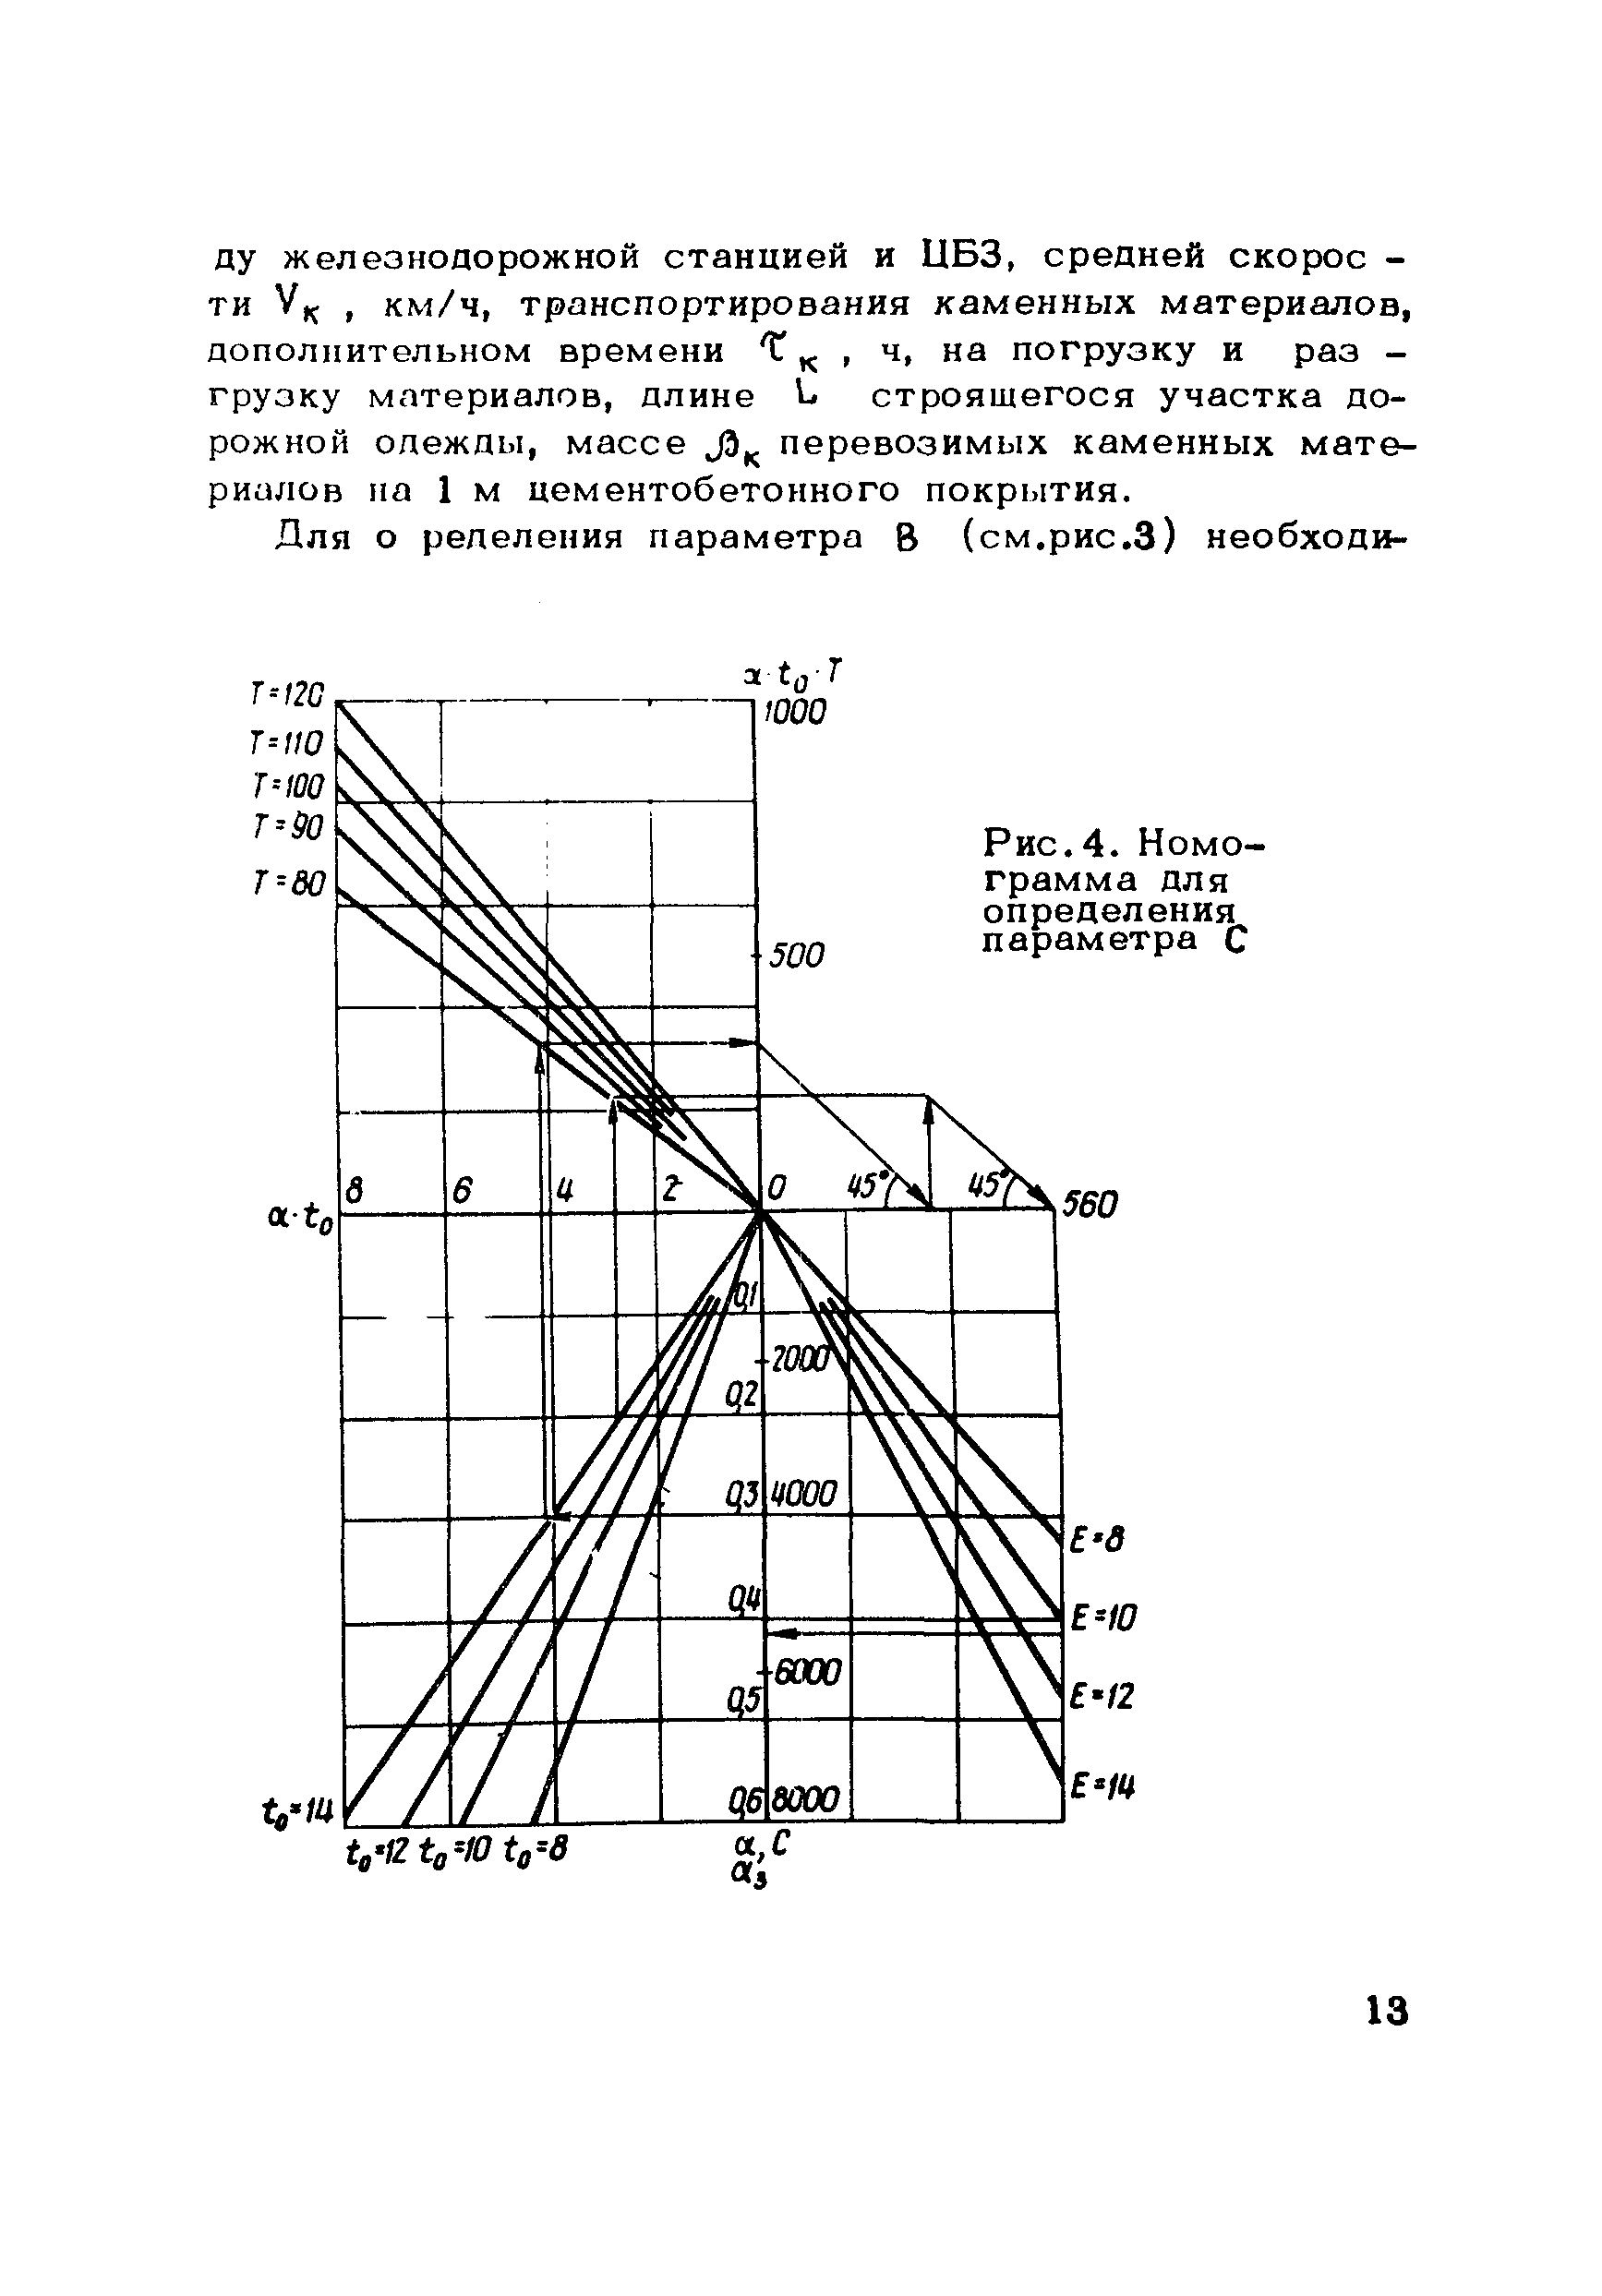 motion and vibration control